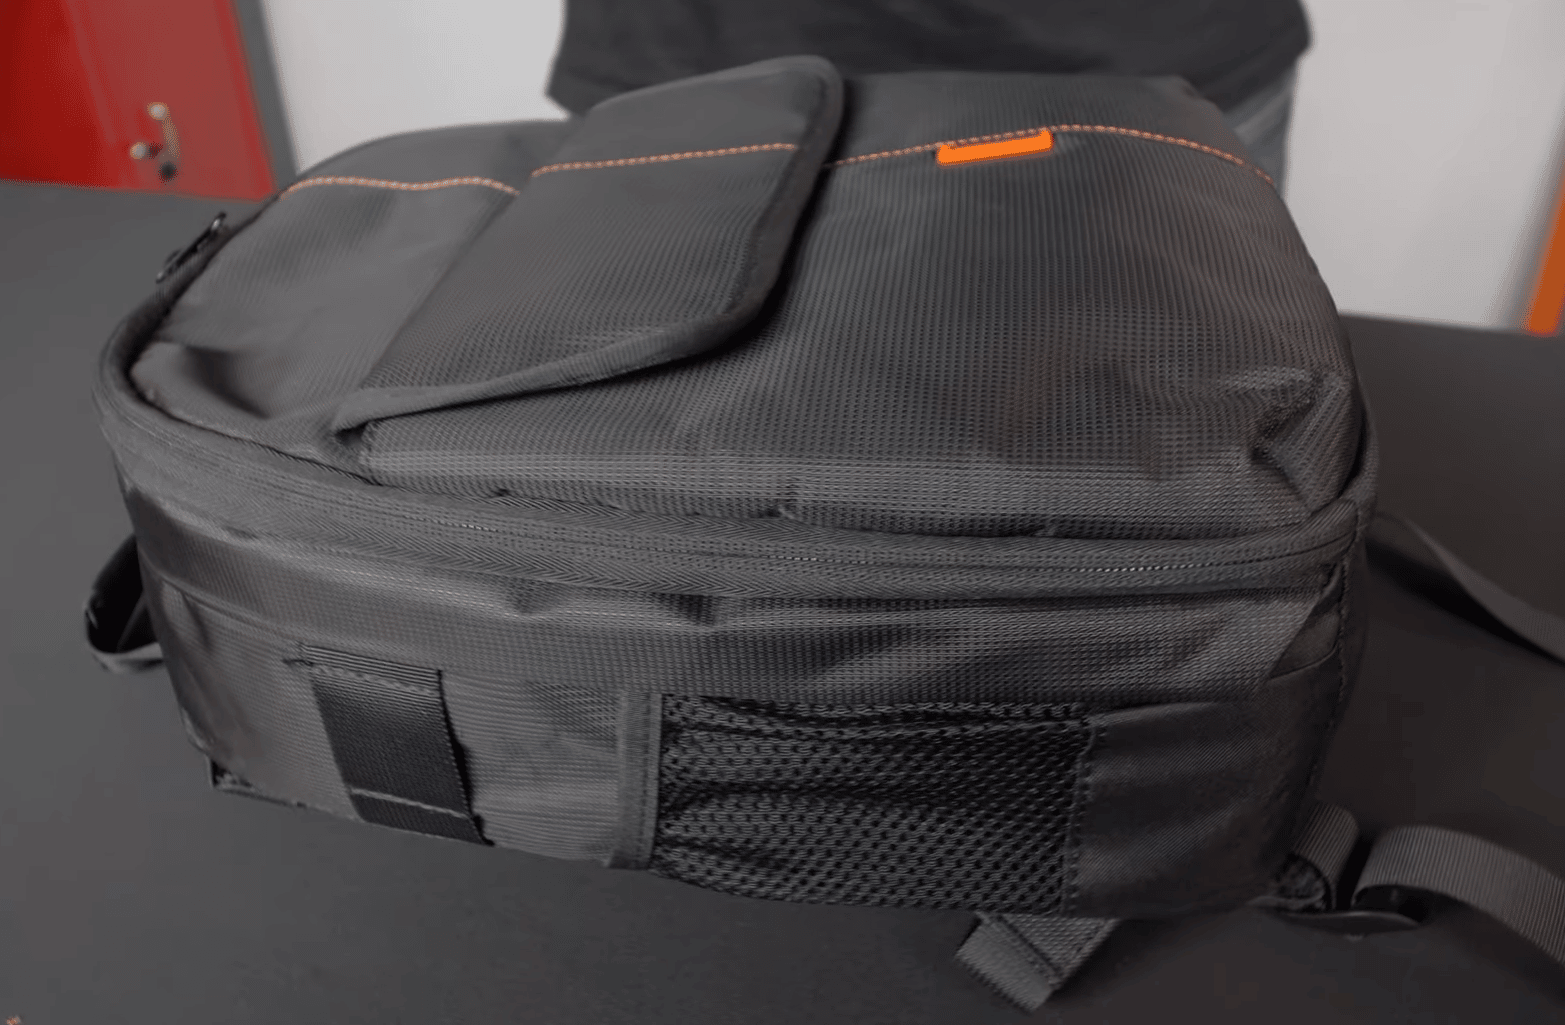 Our choice of drone case is this re-purposed photography backpack